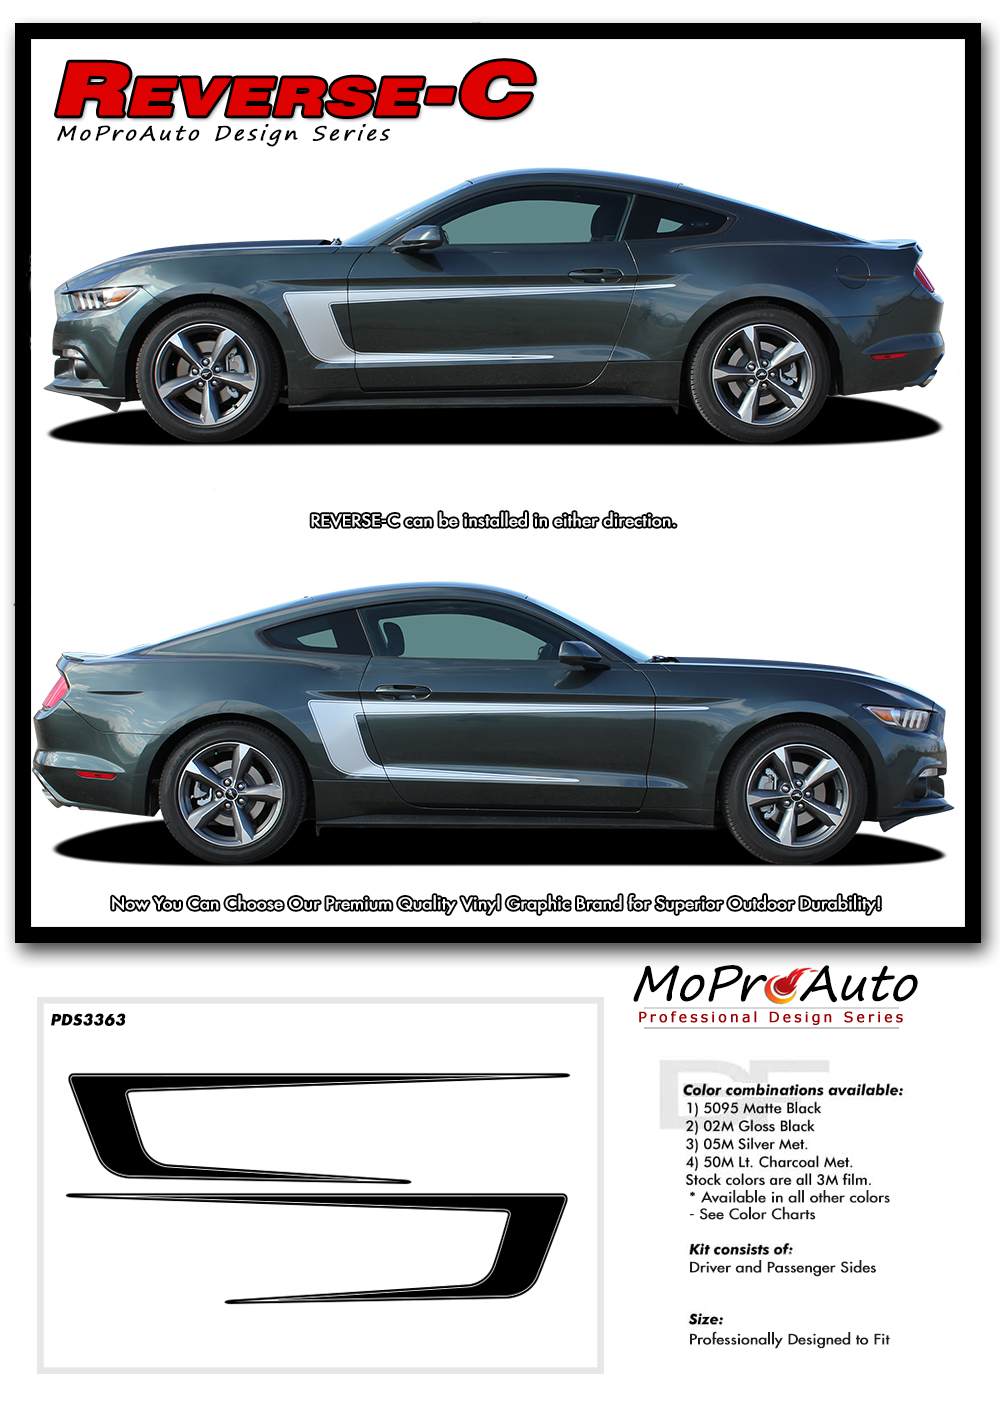 2015 2016 2017 REVERSE-C Ford Mustang - MoProAuto Pro Design Series Vinyl Graphics and Decals Kit